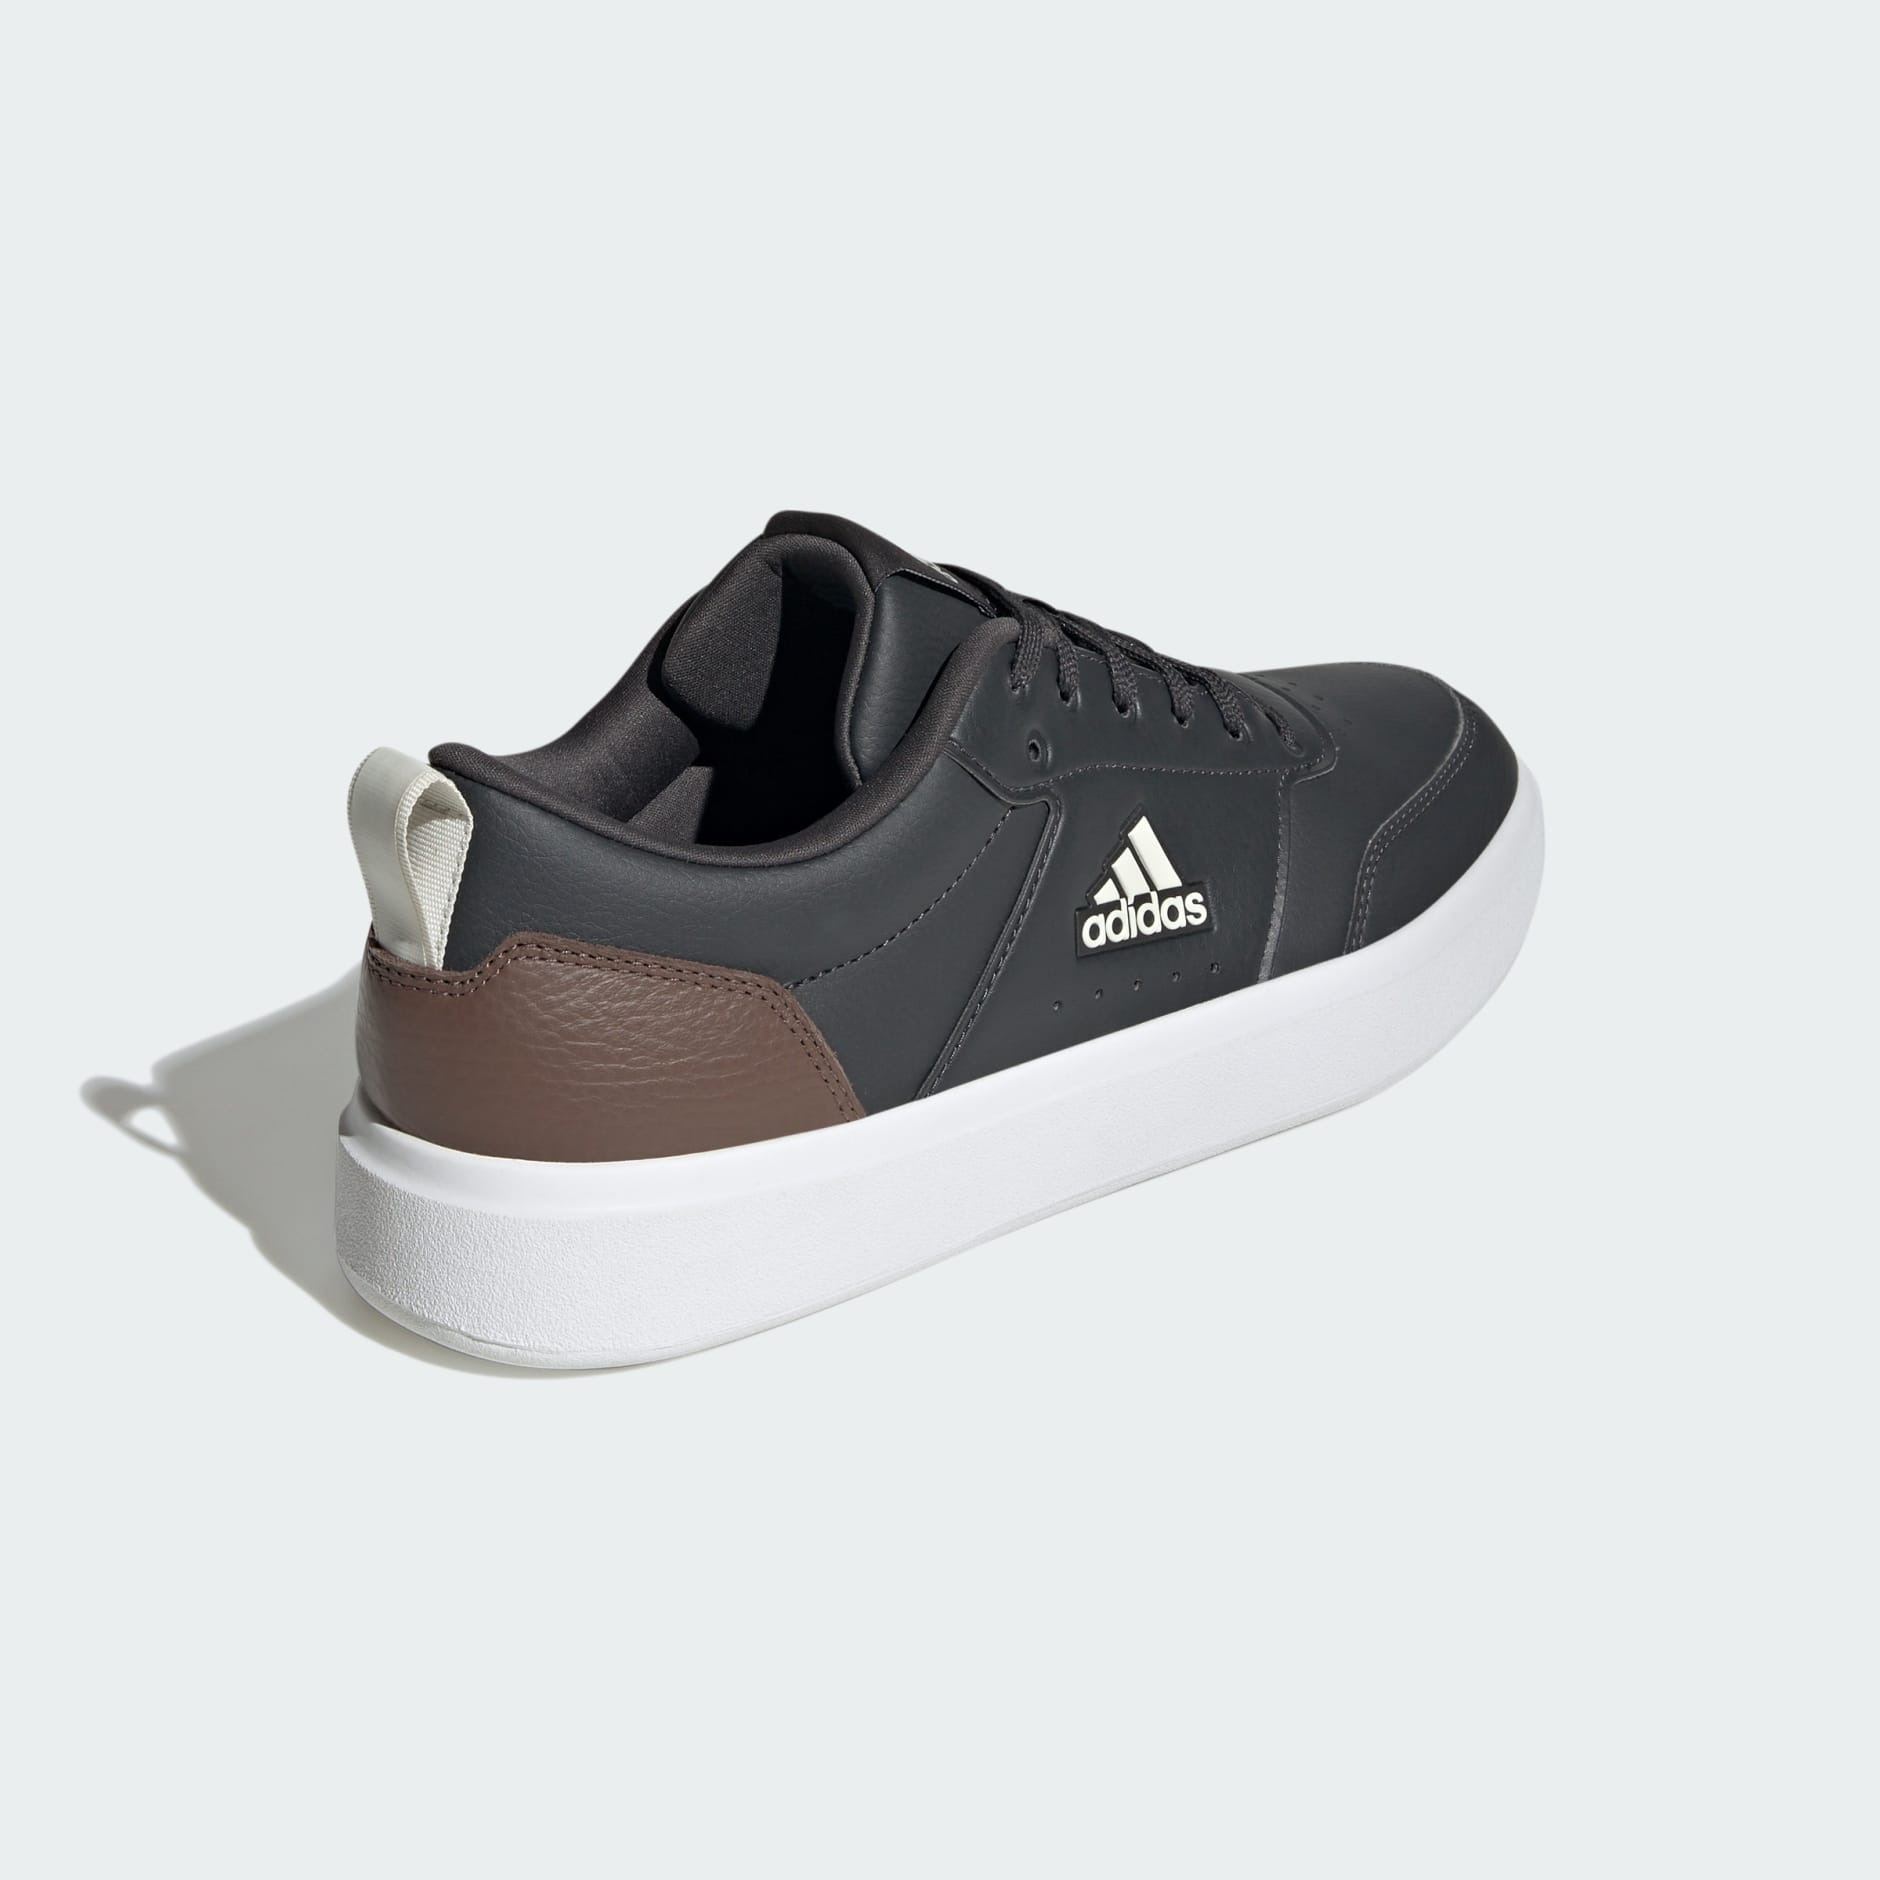 Shoes - Park St. Shoes - Grey | adidas South Africa